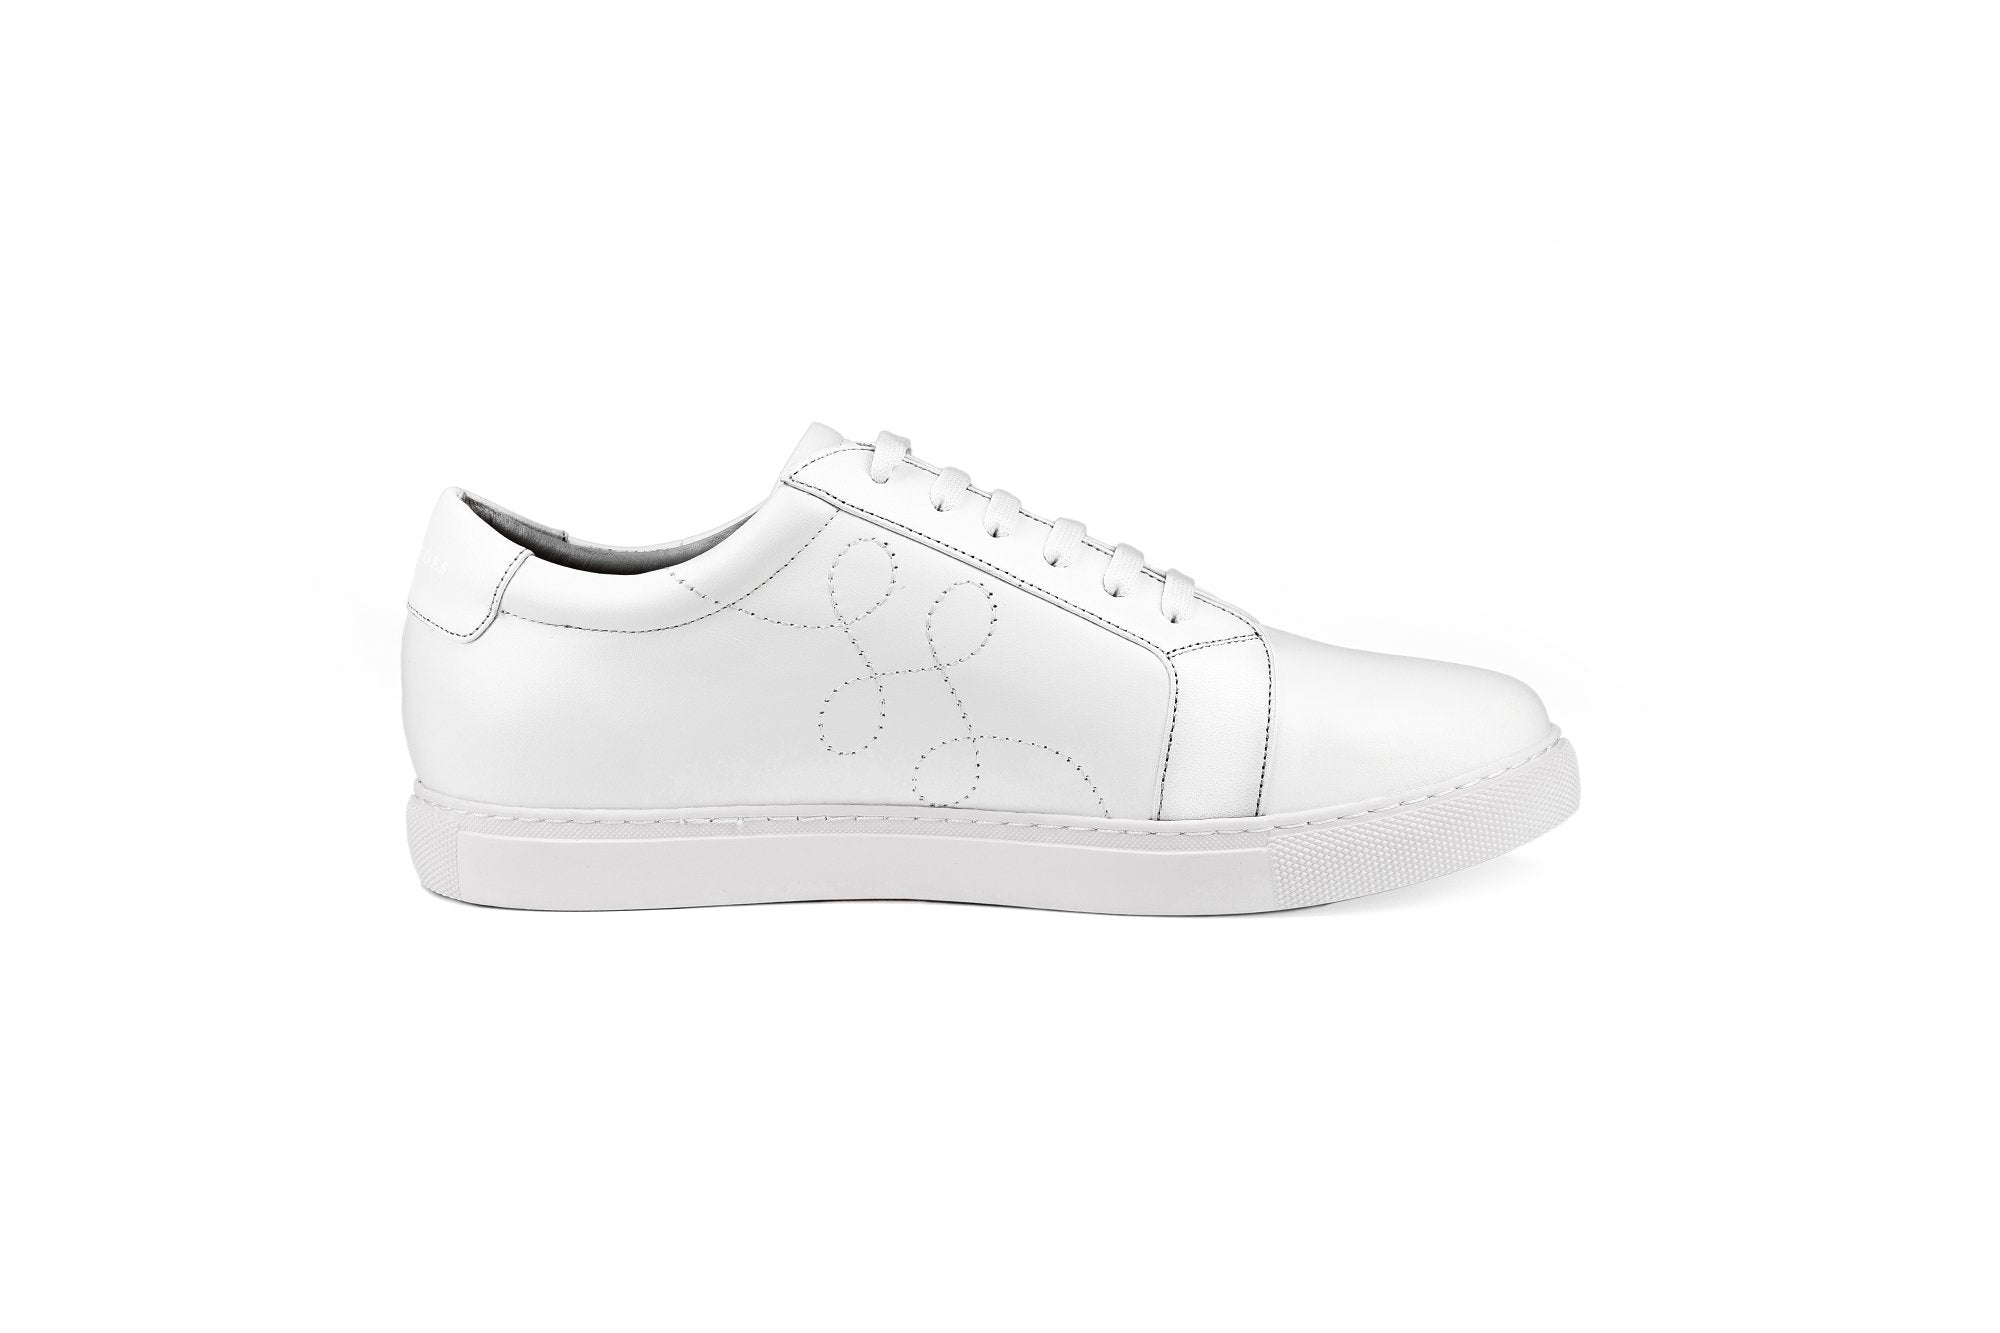 Sole Shoes Sneaker White Flats by Sole Shoes NZ F20-36